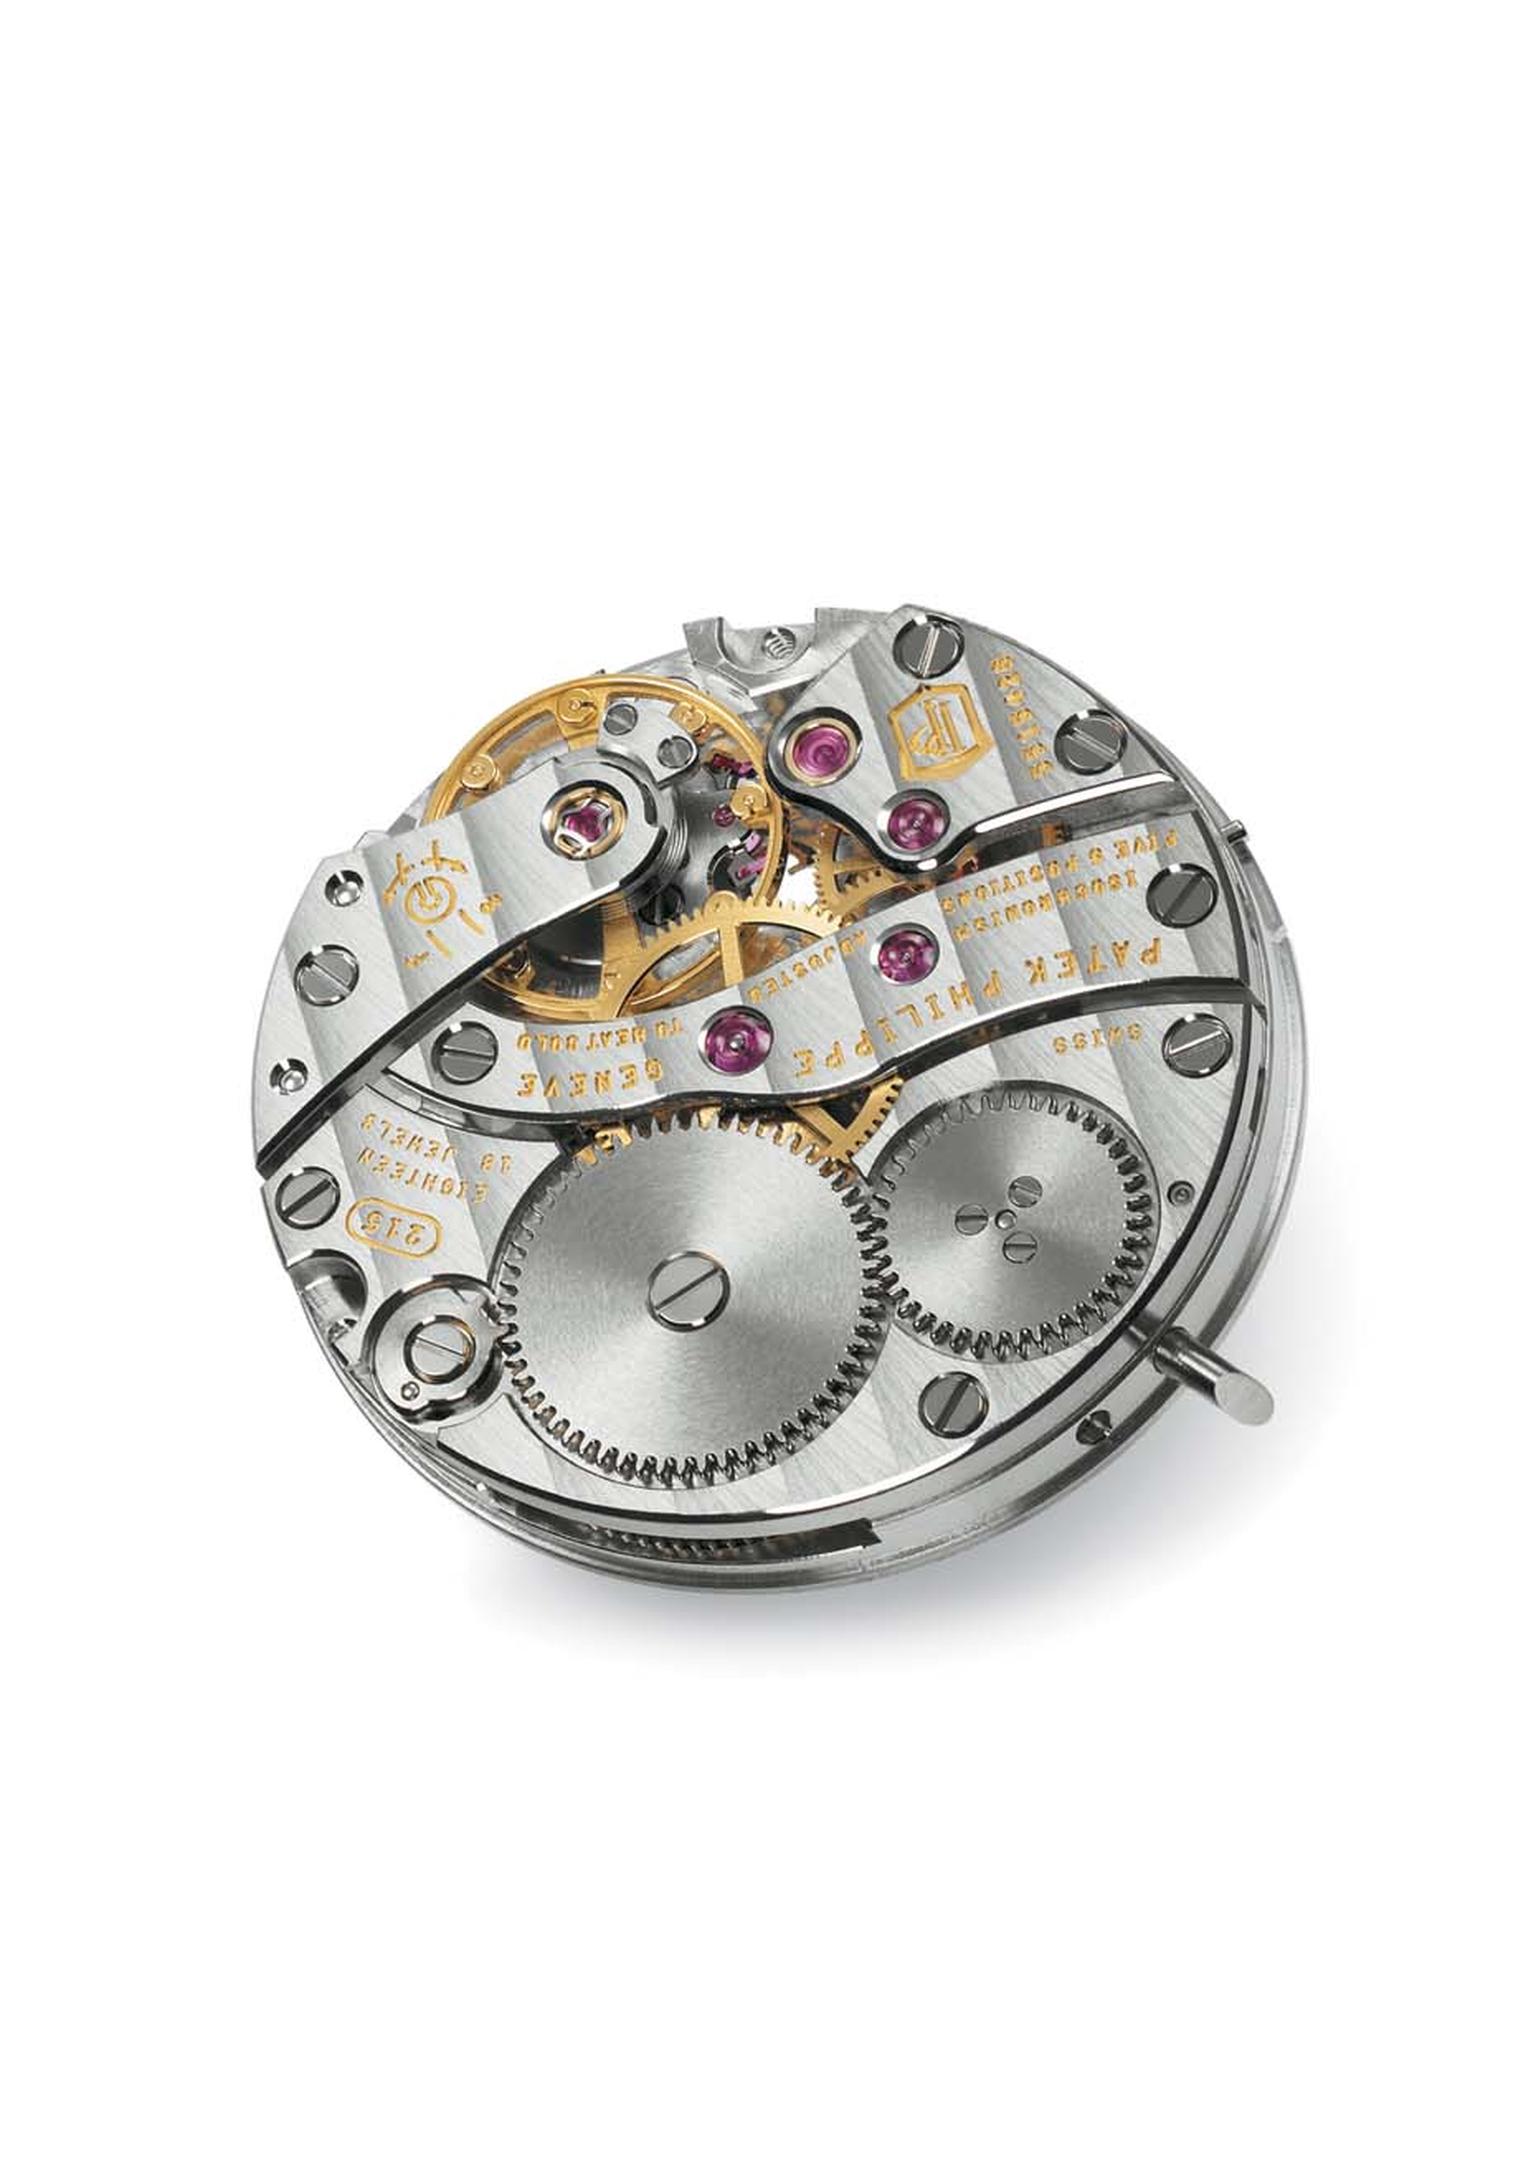 The movement of a Patek Philippe watch features the double “PP” symbol engraved in the escape-wheel bridge, used to indicate that the movement has obtained the Patek Philippe Seal. In this case, calibre 215 can only tolerate daily deviations of -3 to +2 s